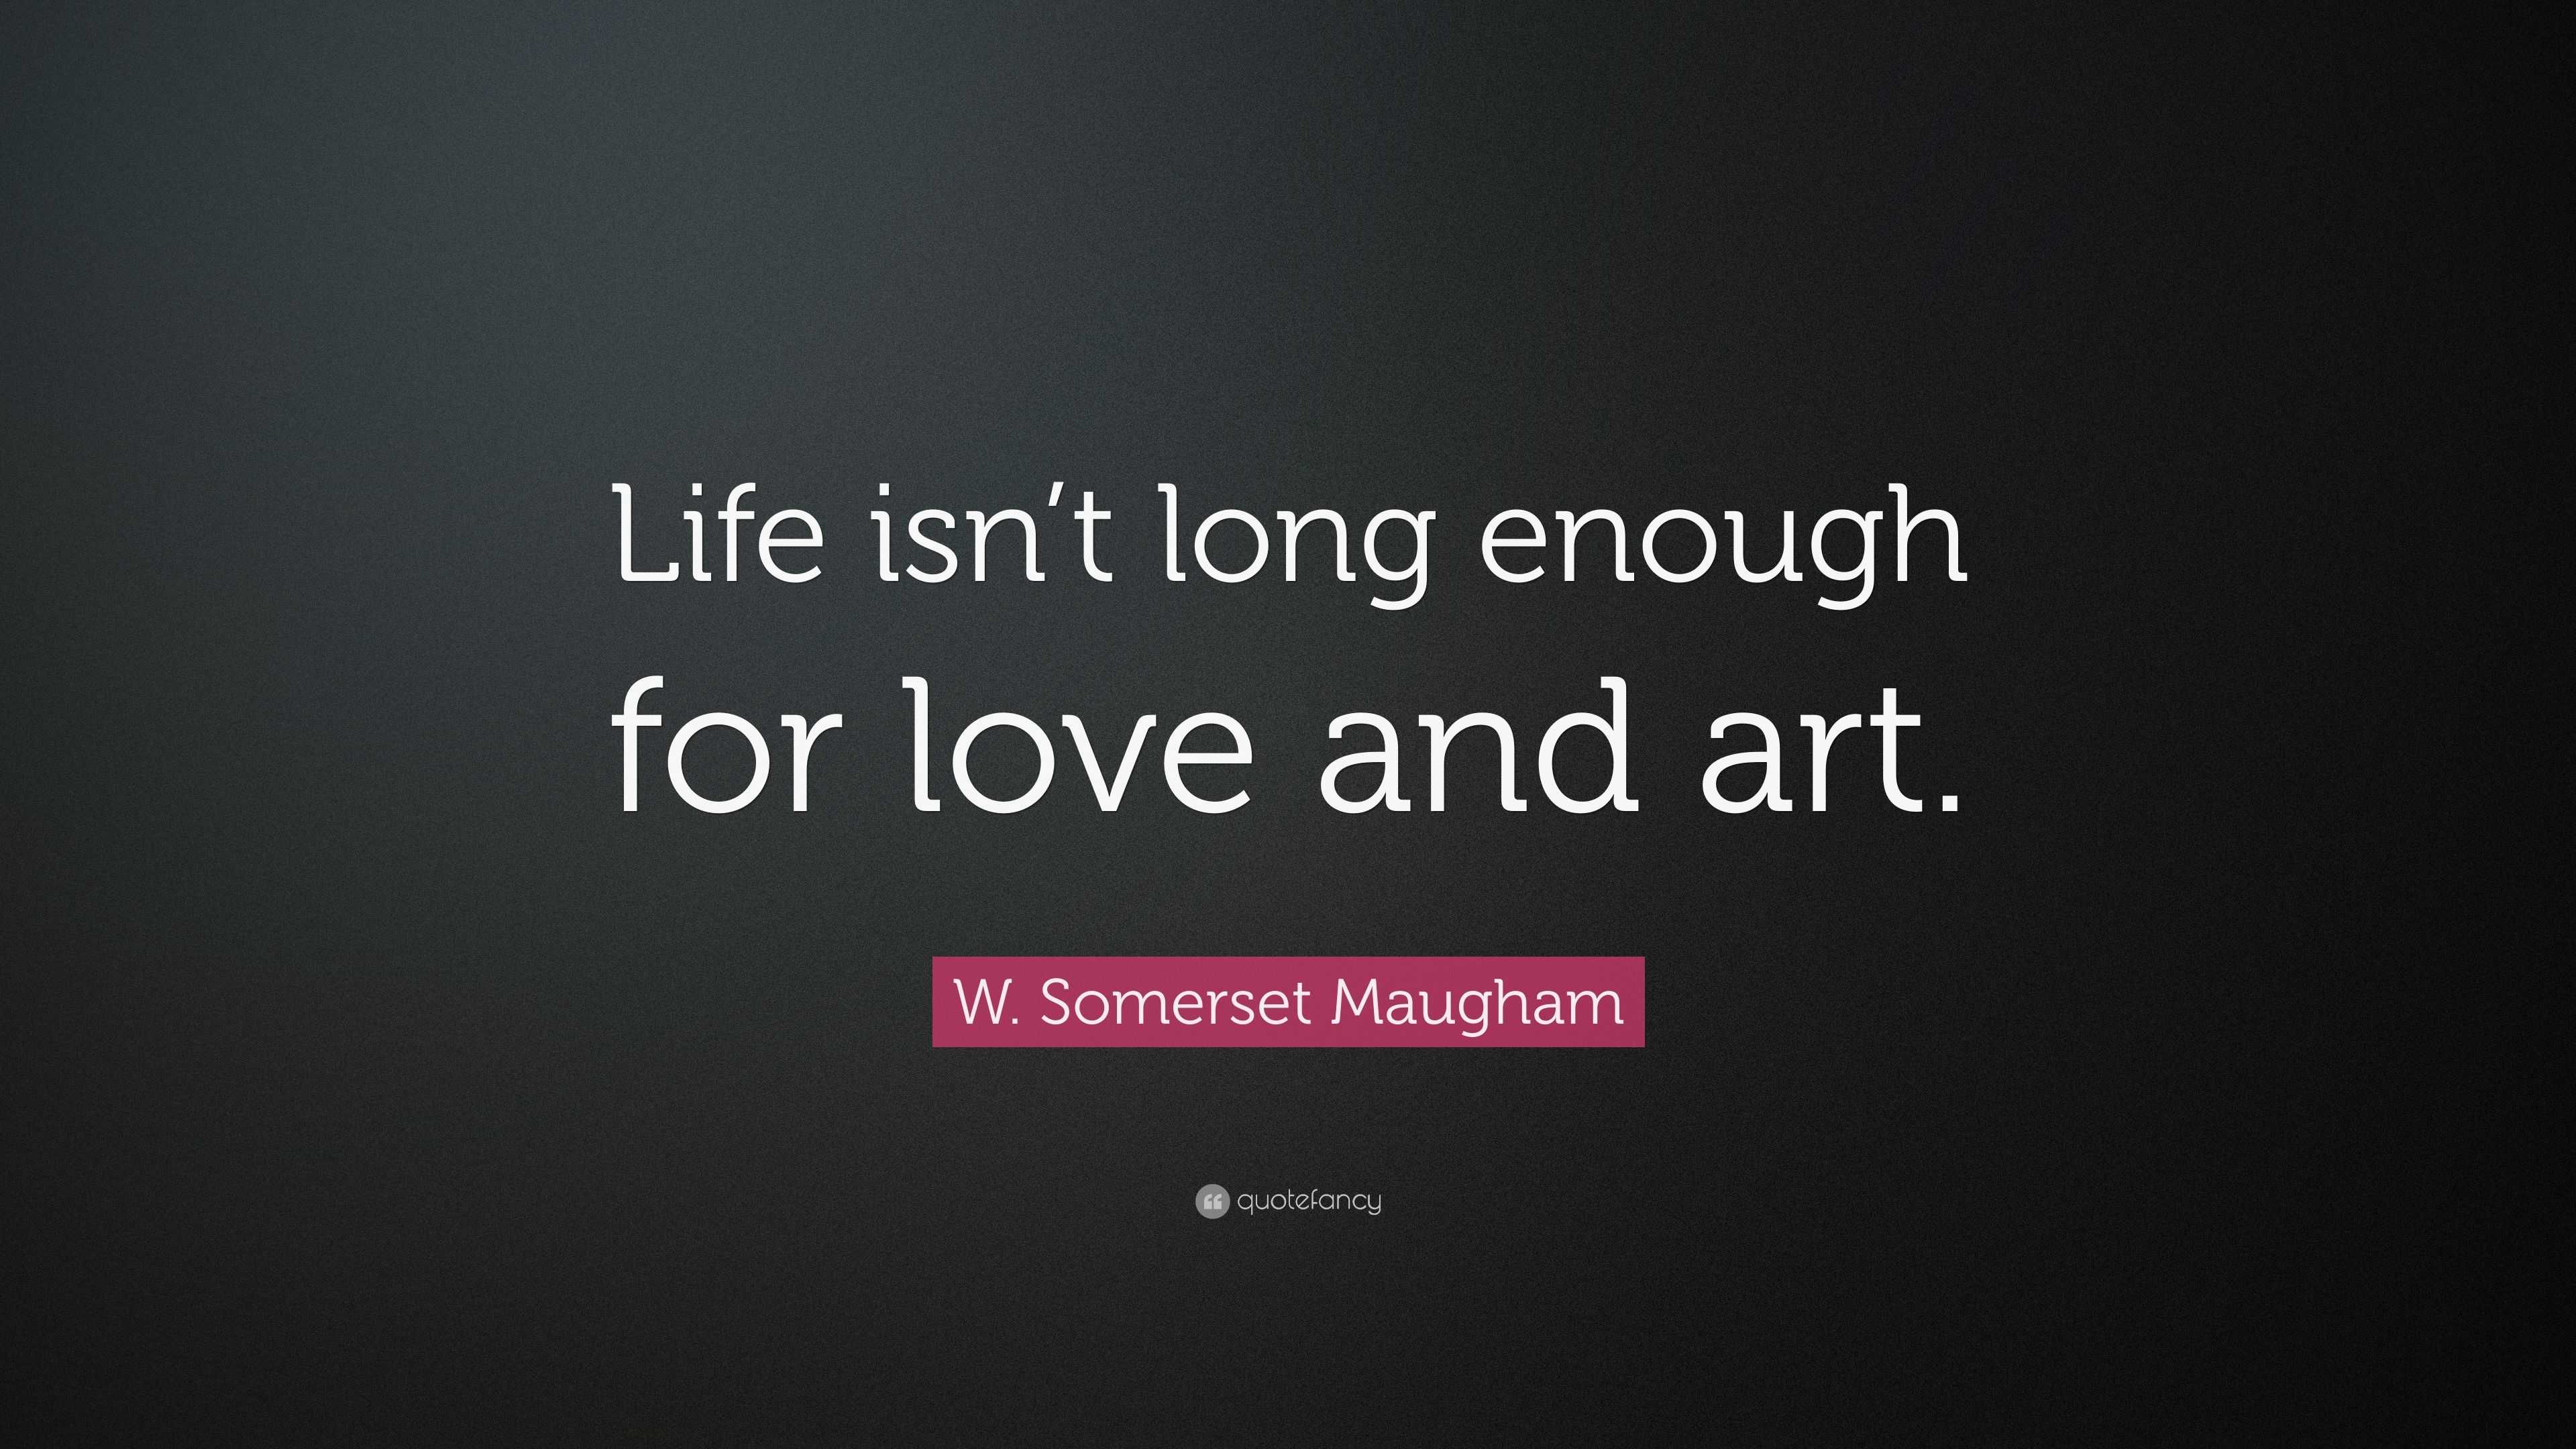 W Somerset Maugham Quote “Life isn t long enough for love and